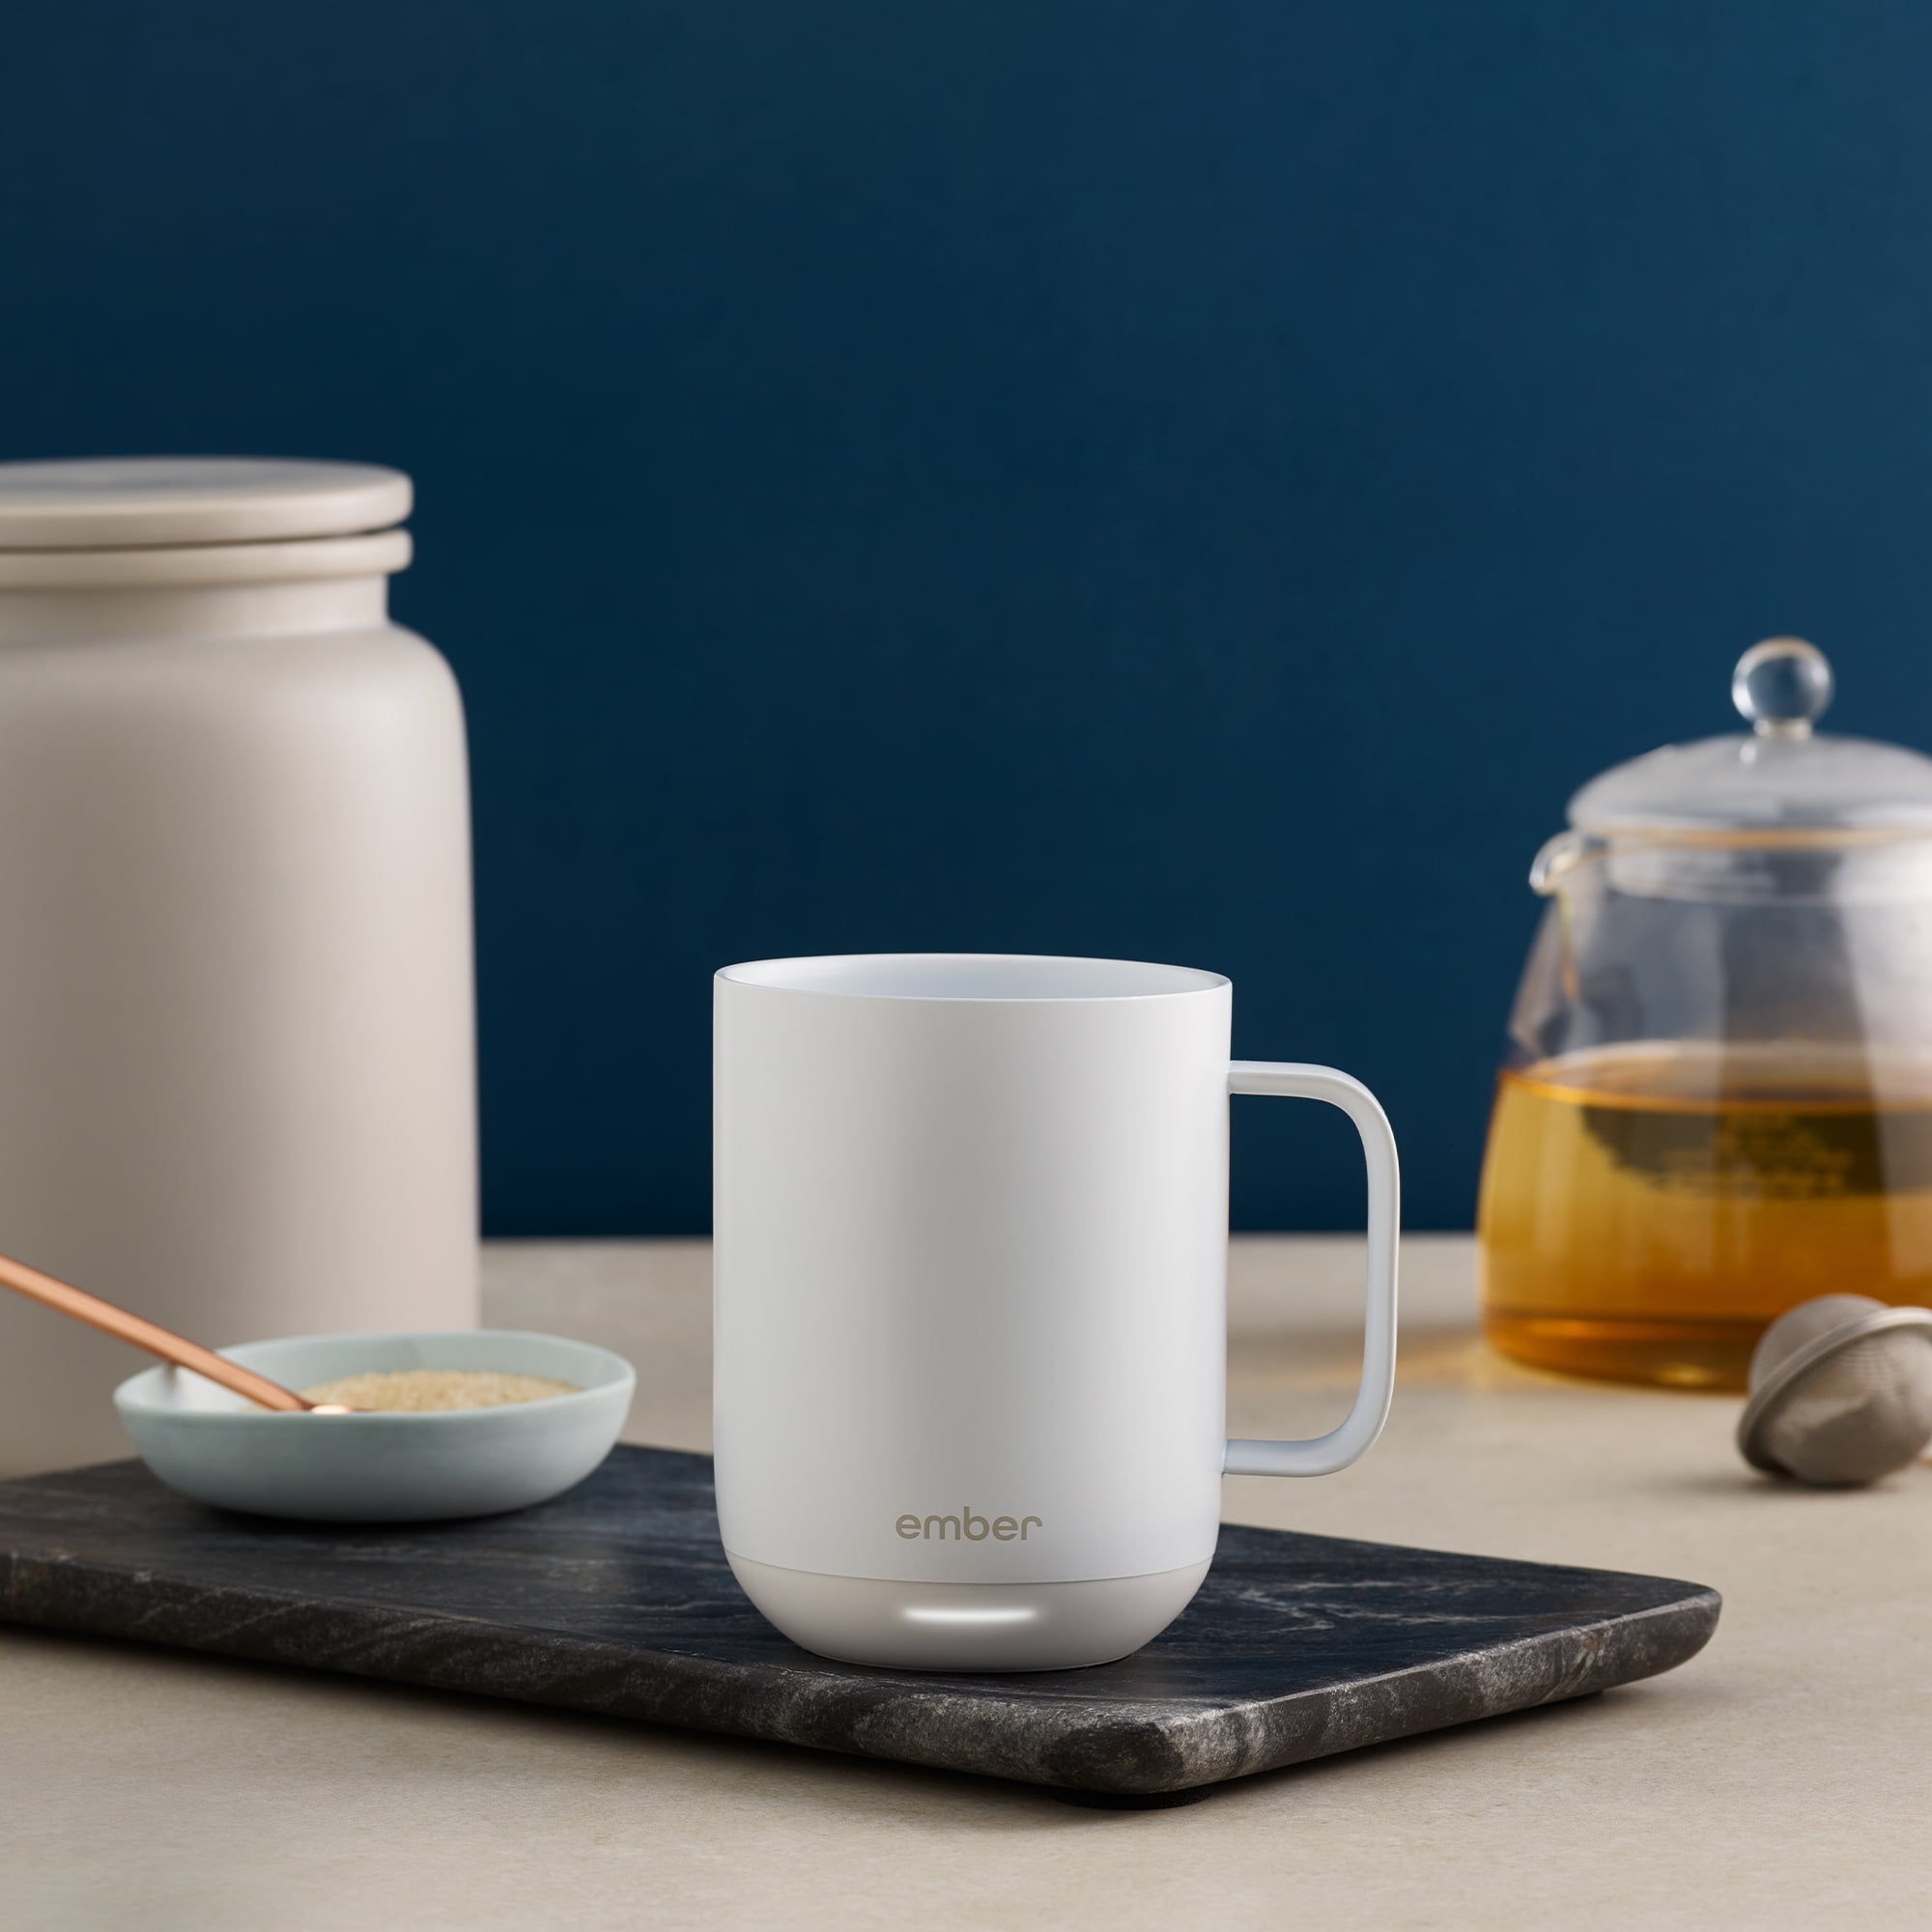 Lakeland on X: Win 1 of 3 Ember Temperature Controlled Mugs worth